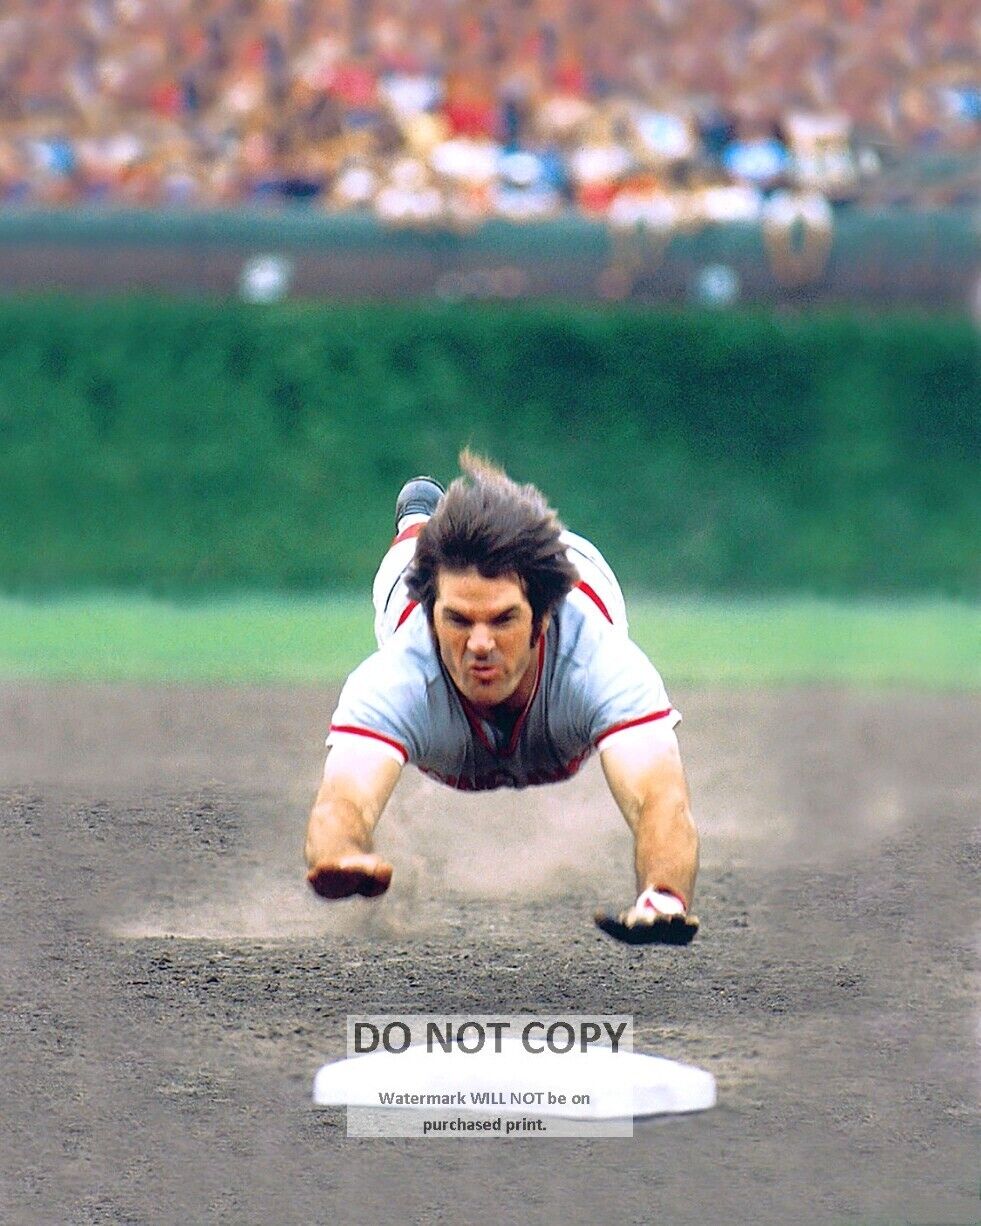 PETE ROSE MAKES A HEAD FIRST SLIDE \